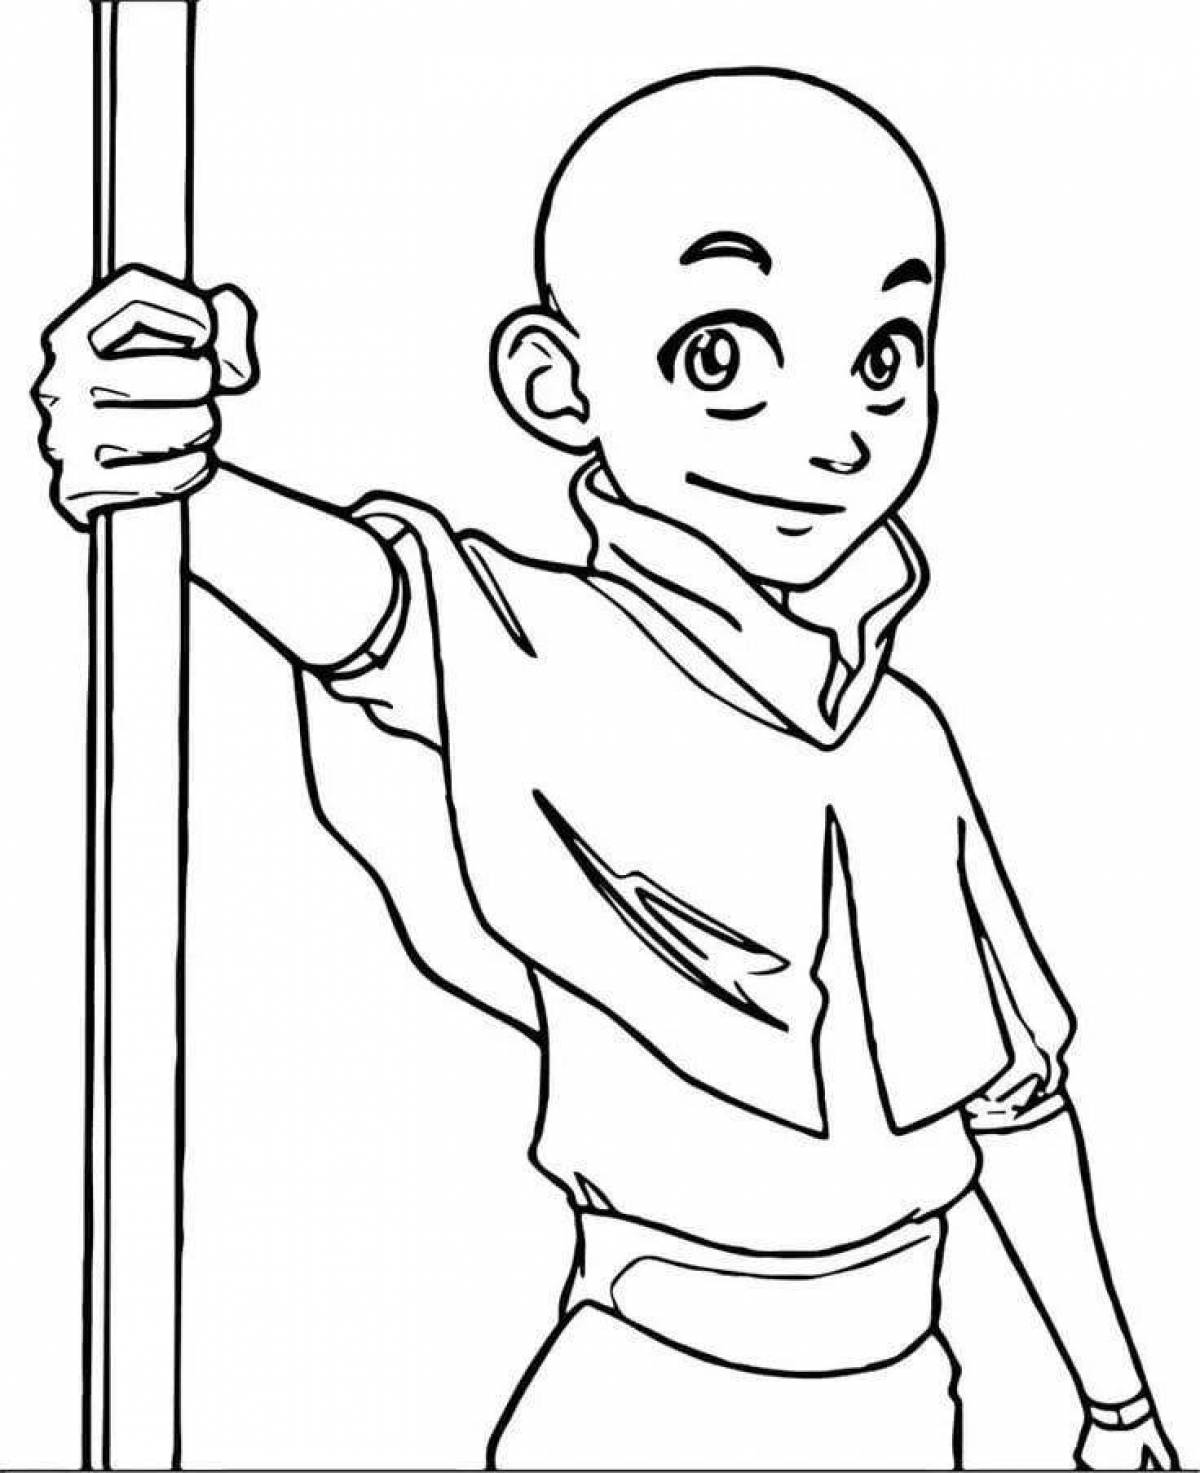 Gorgeous avatar coloring book the last of the aang